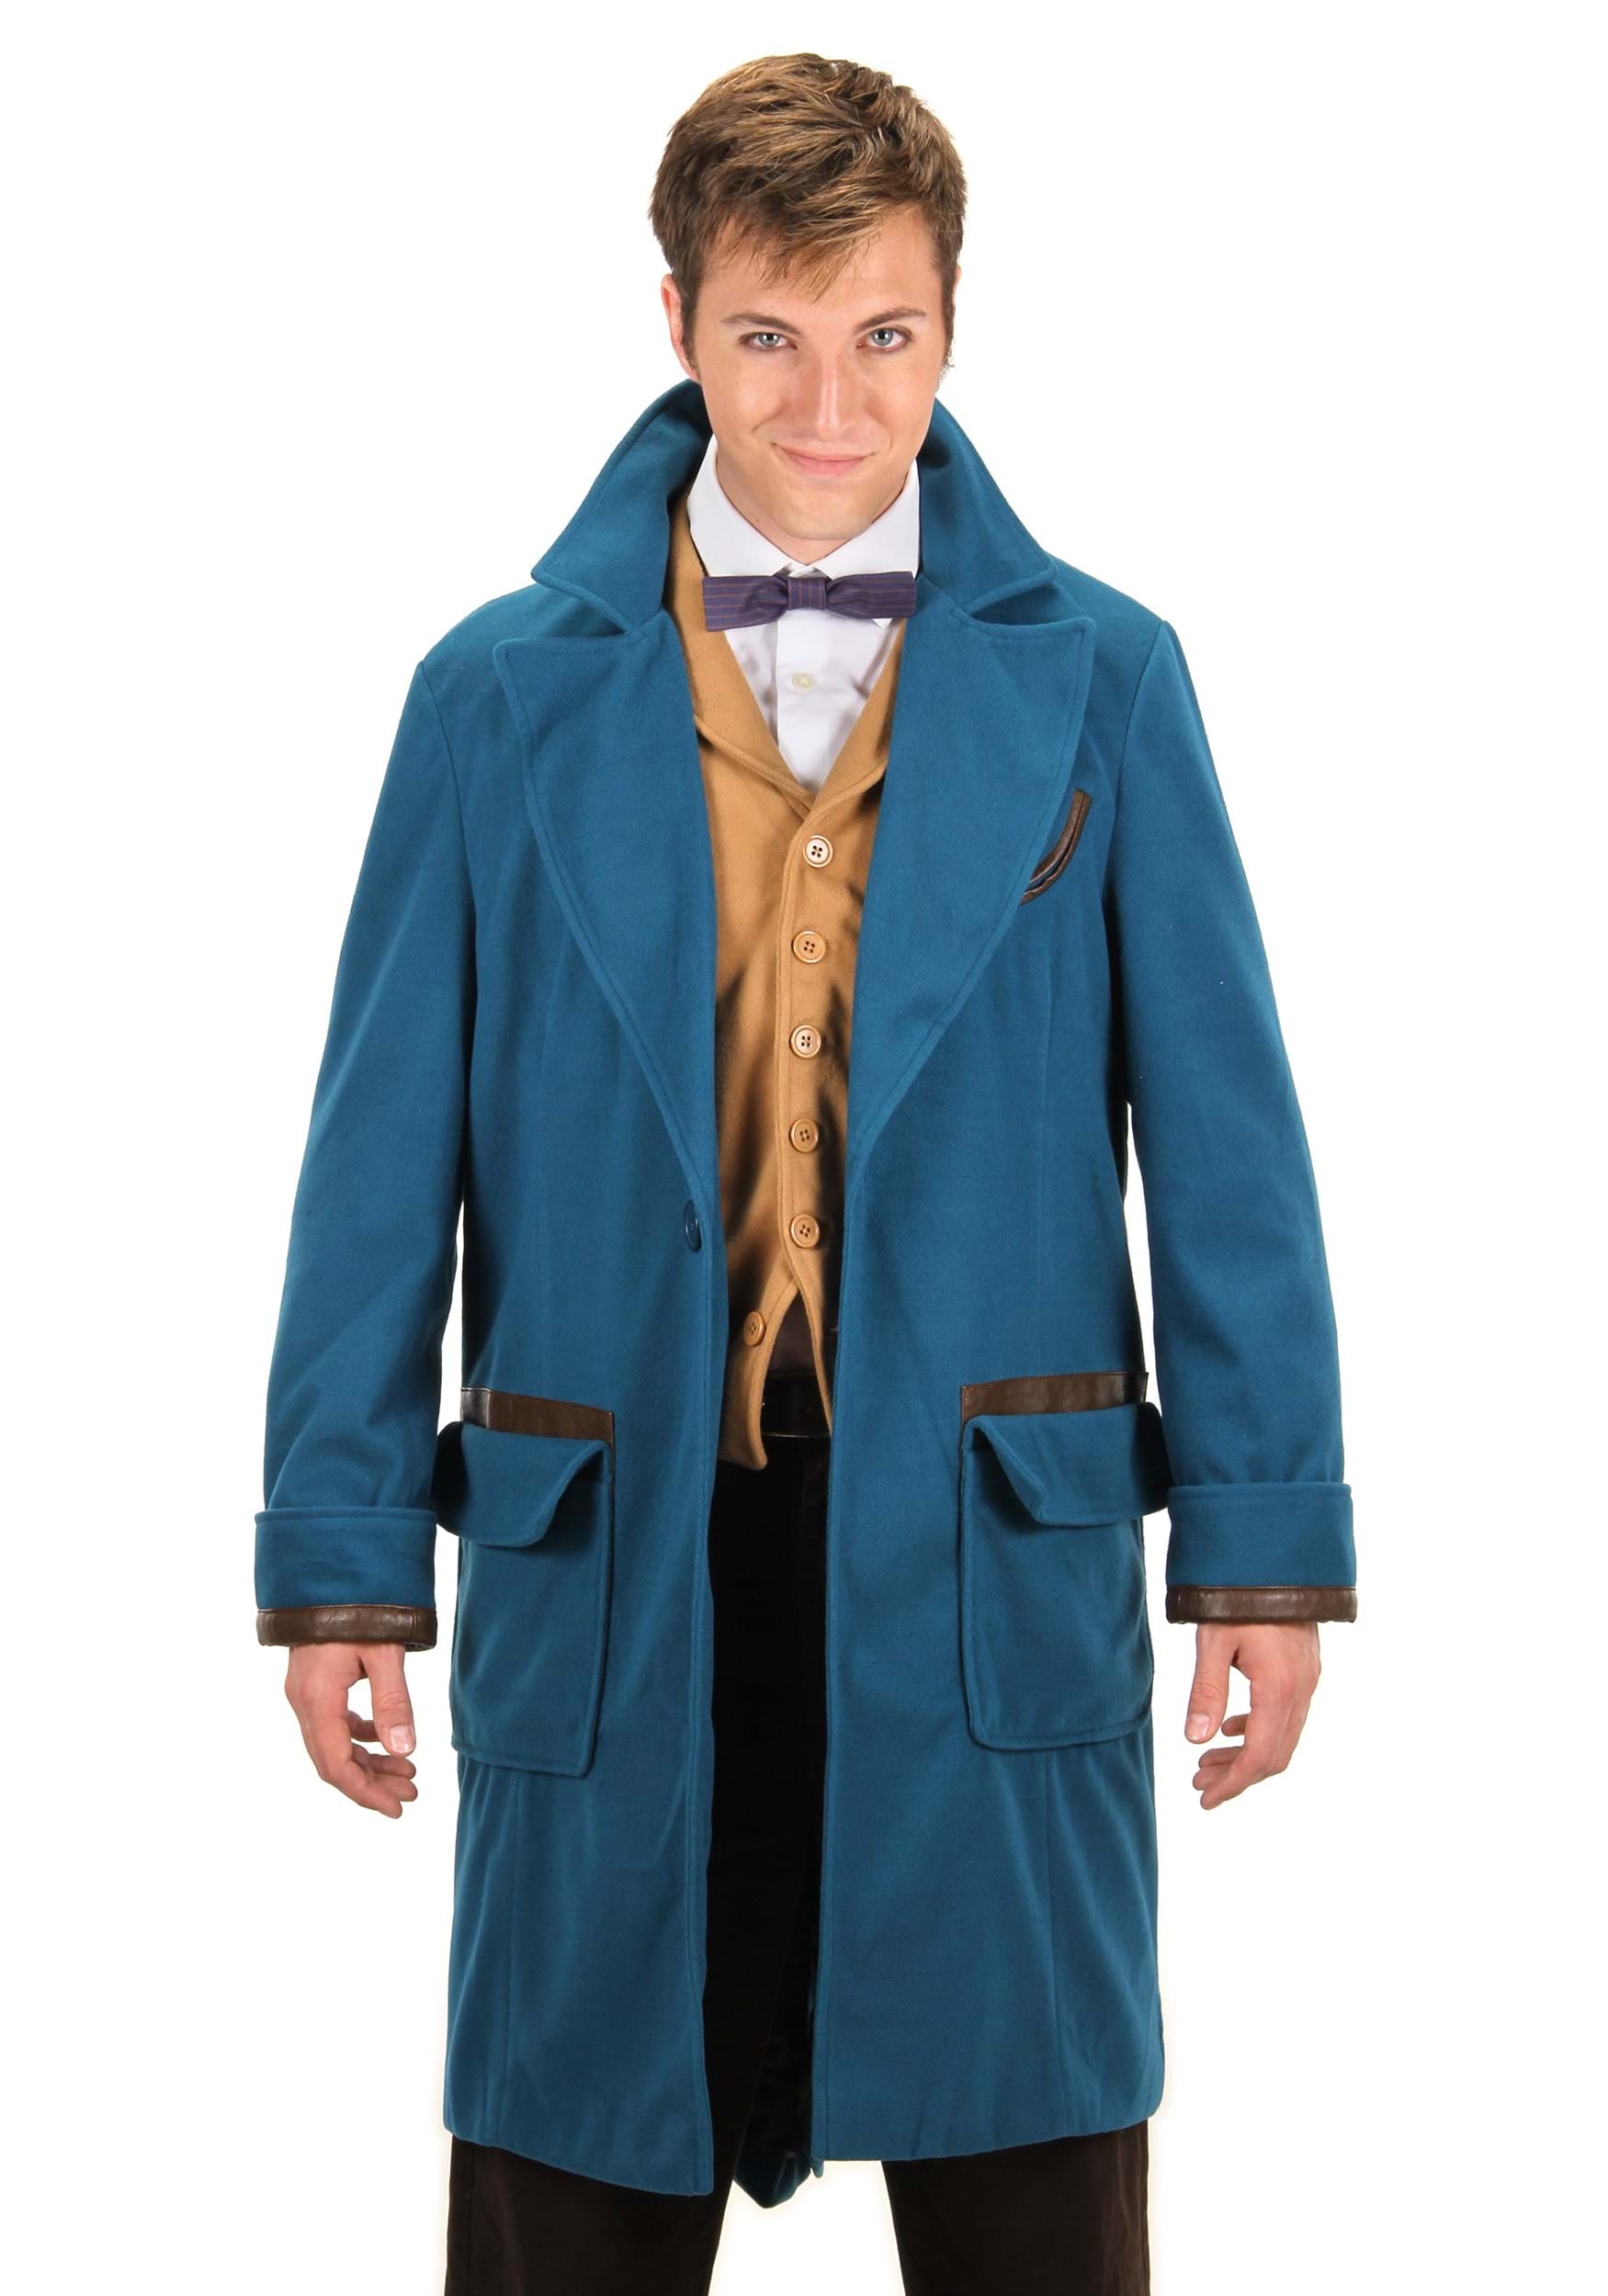 Image of Newt Scamander Coat Costume Fantastic Beasts and Where to Find Them ID EL400021-L/XL